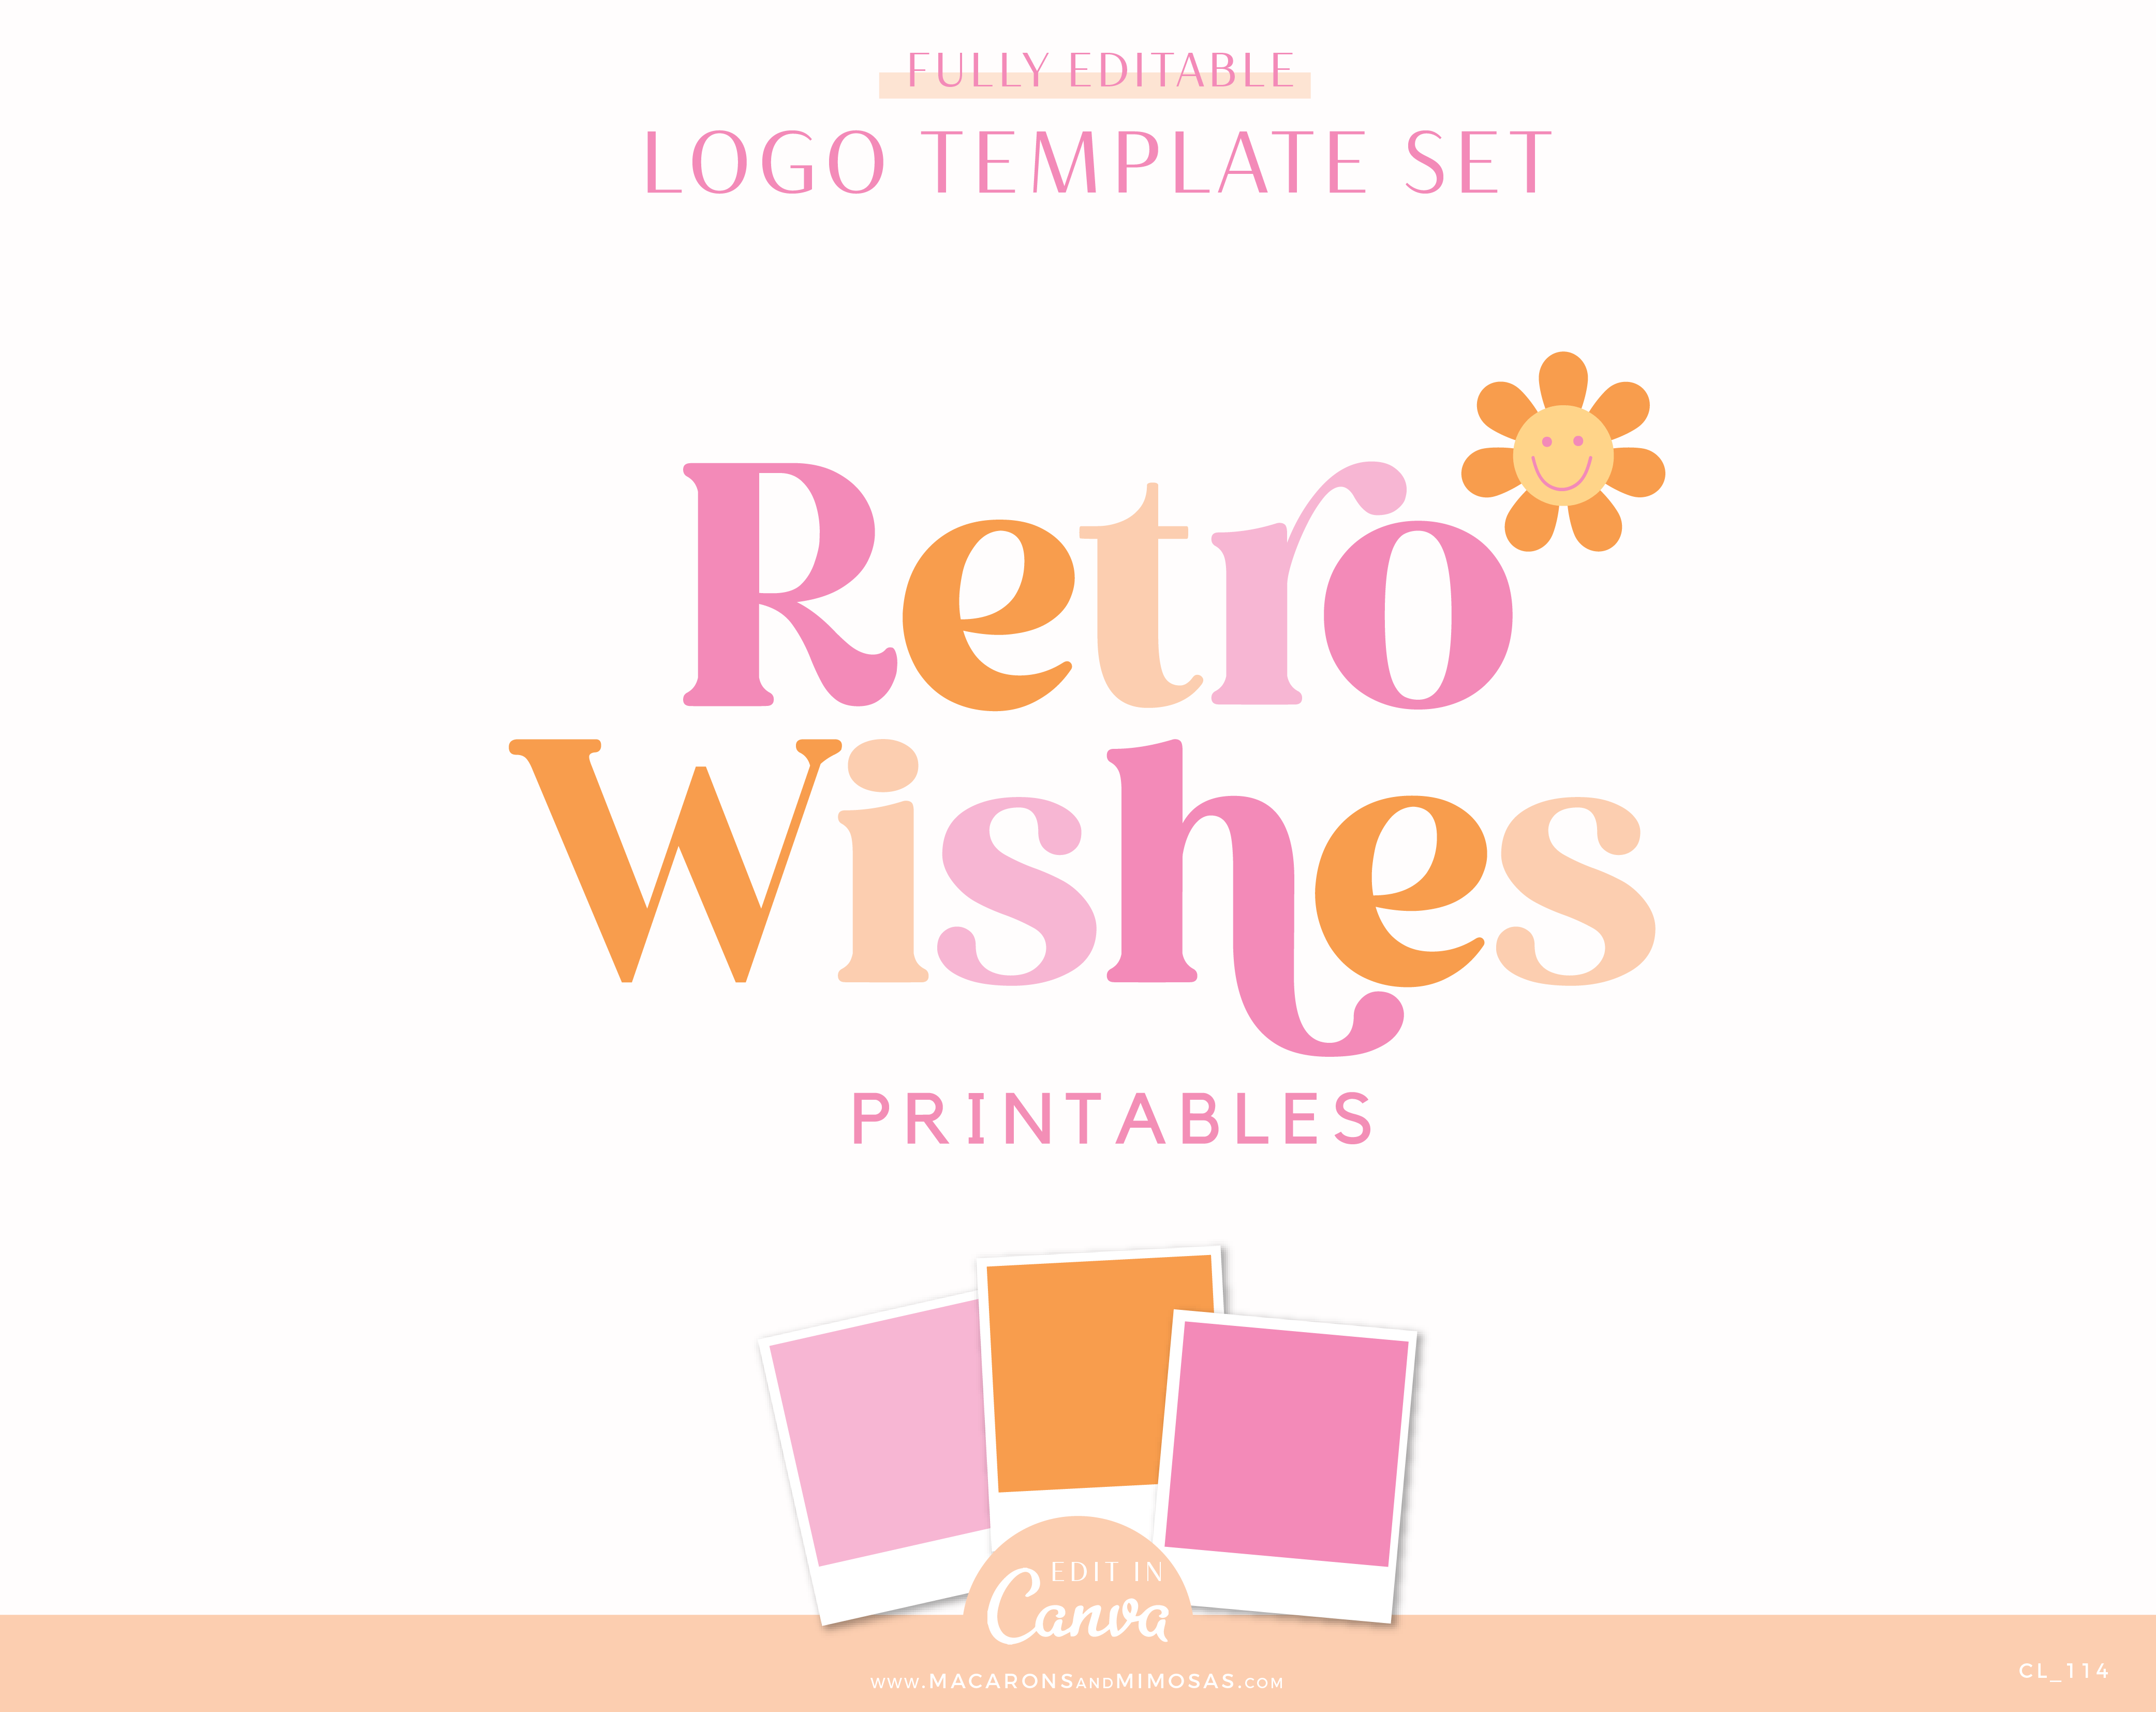 Retro daisy logo design template with flower icon graphic in pink and orange color scheme. Perfect for any business to style its brand.